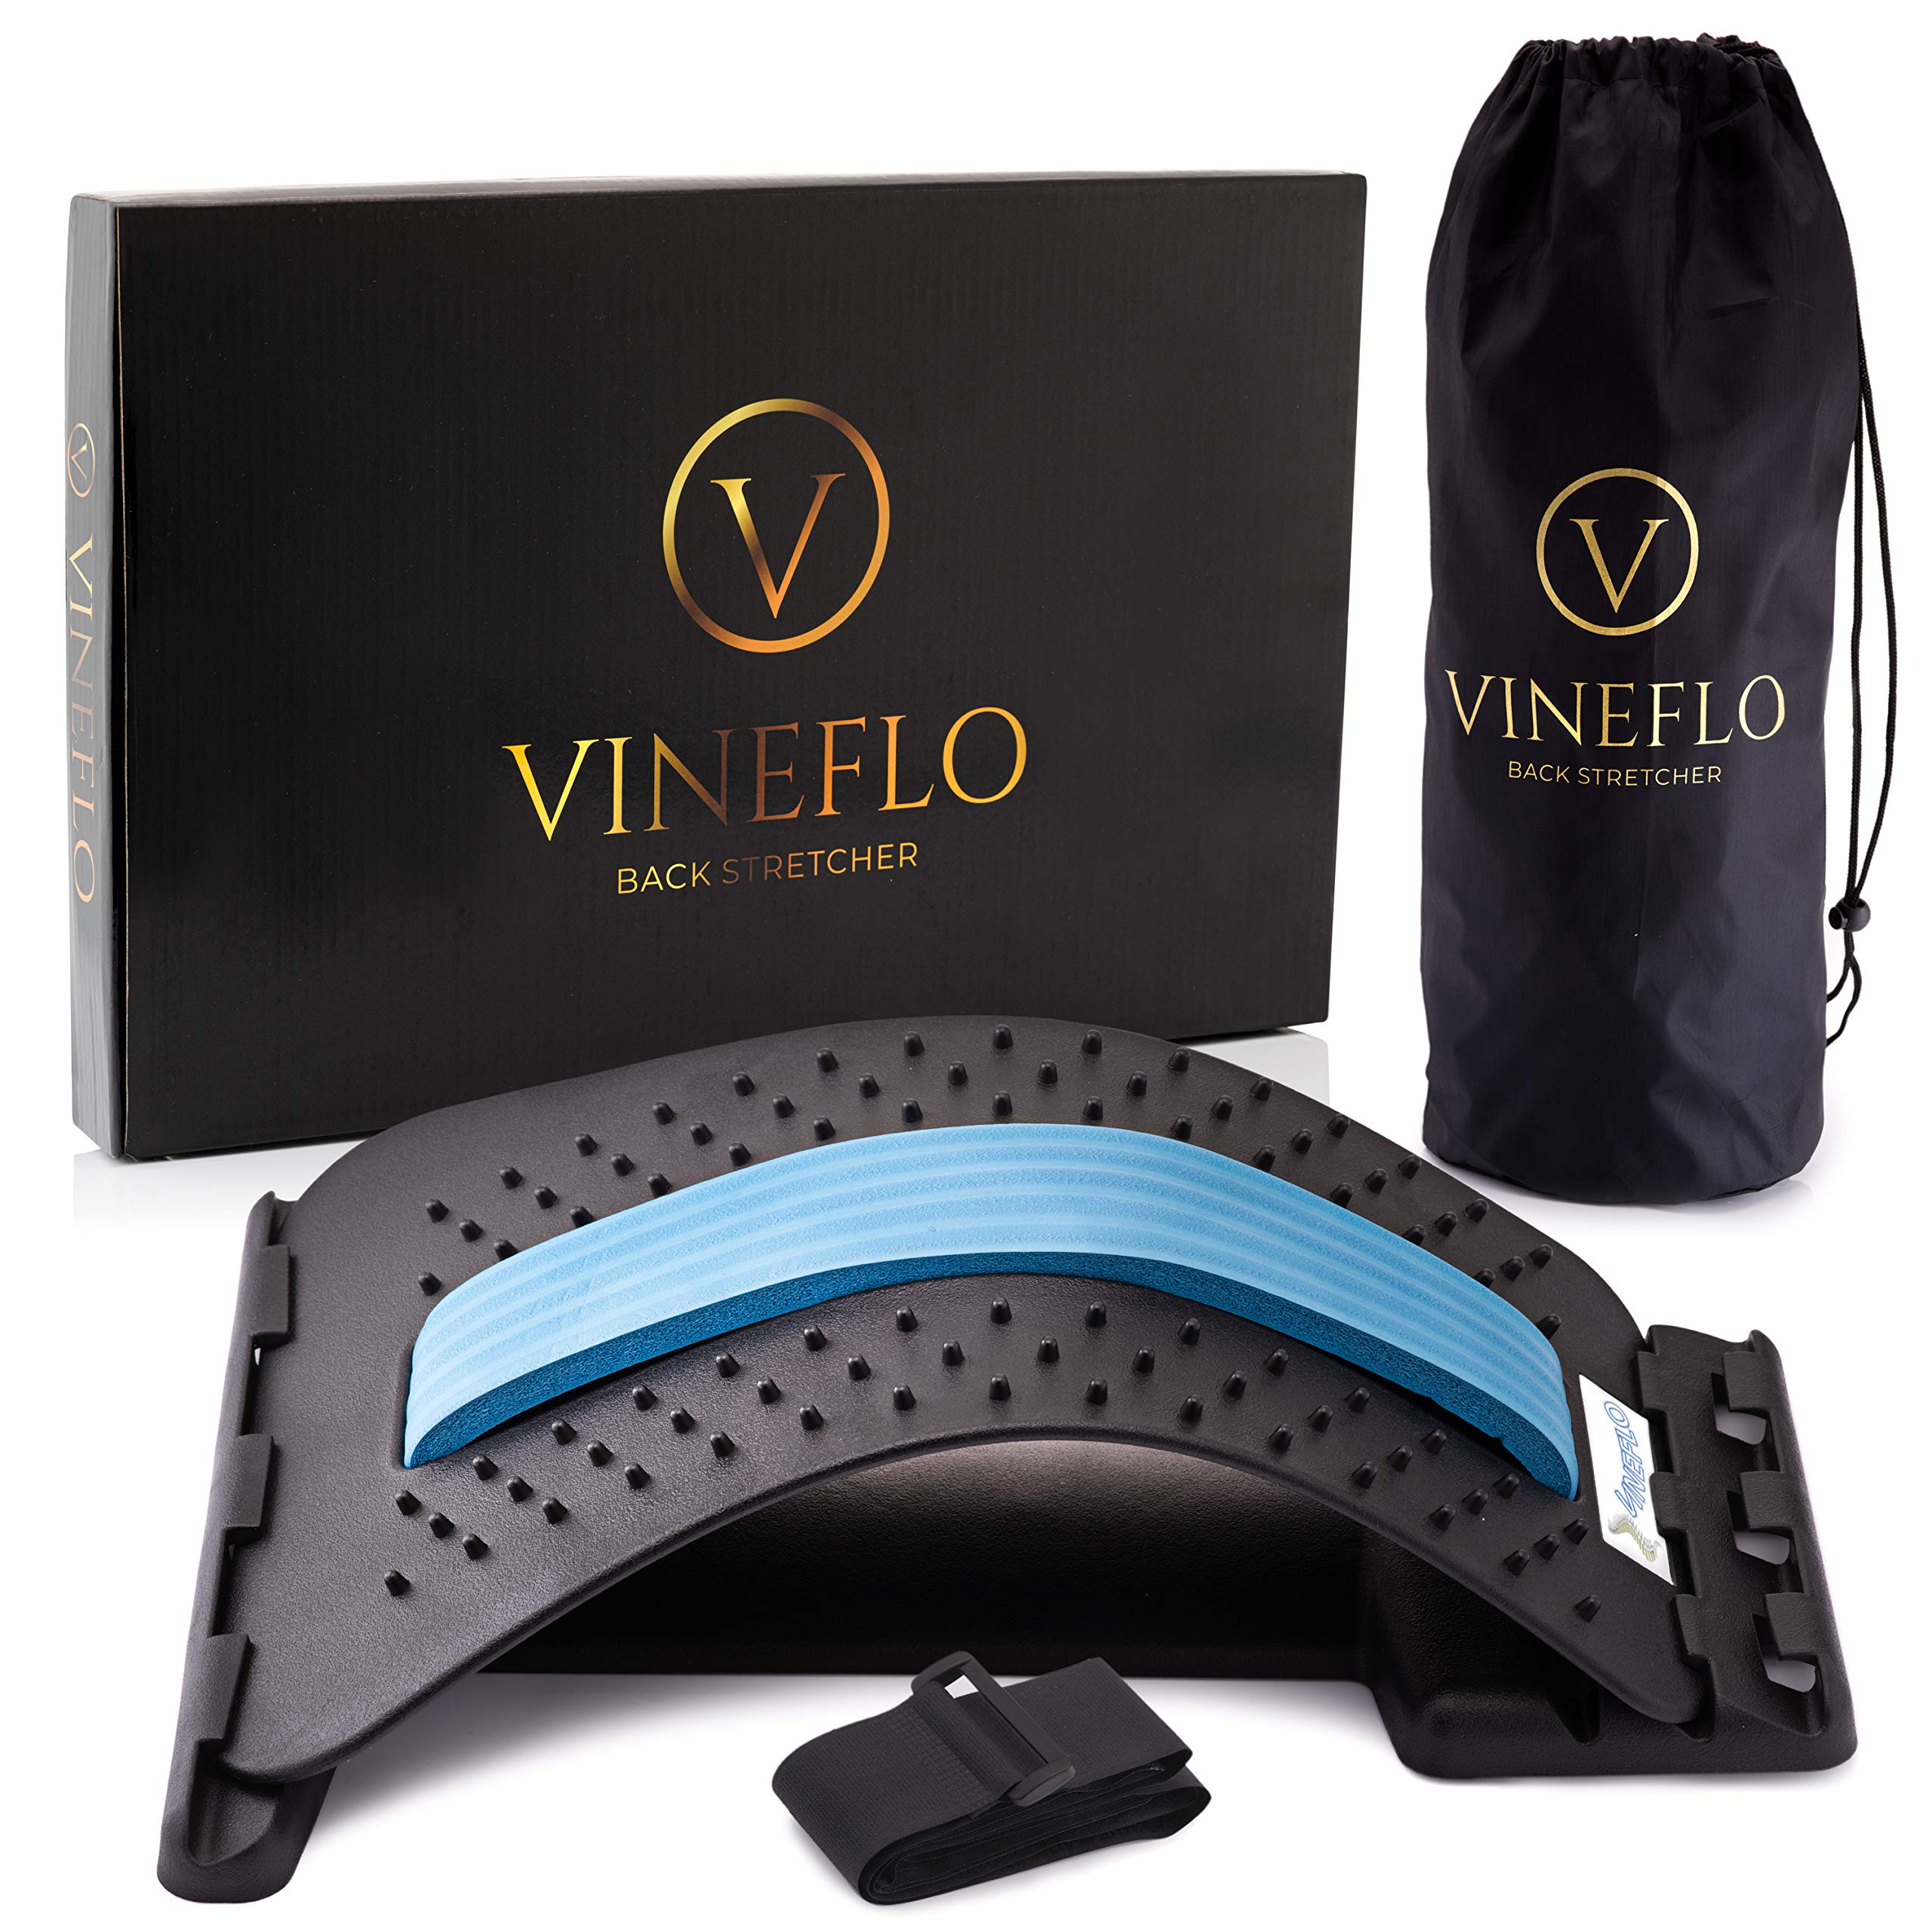 Vineflo Back Stretcher, Lower & Upper Back Stretcher, Back Massager Use to Support Back Relaxation and Back Pain Relief, Spinal Pain Relief, Posture Corrector